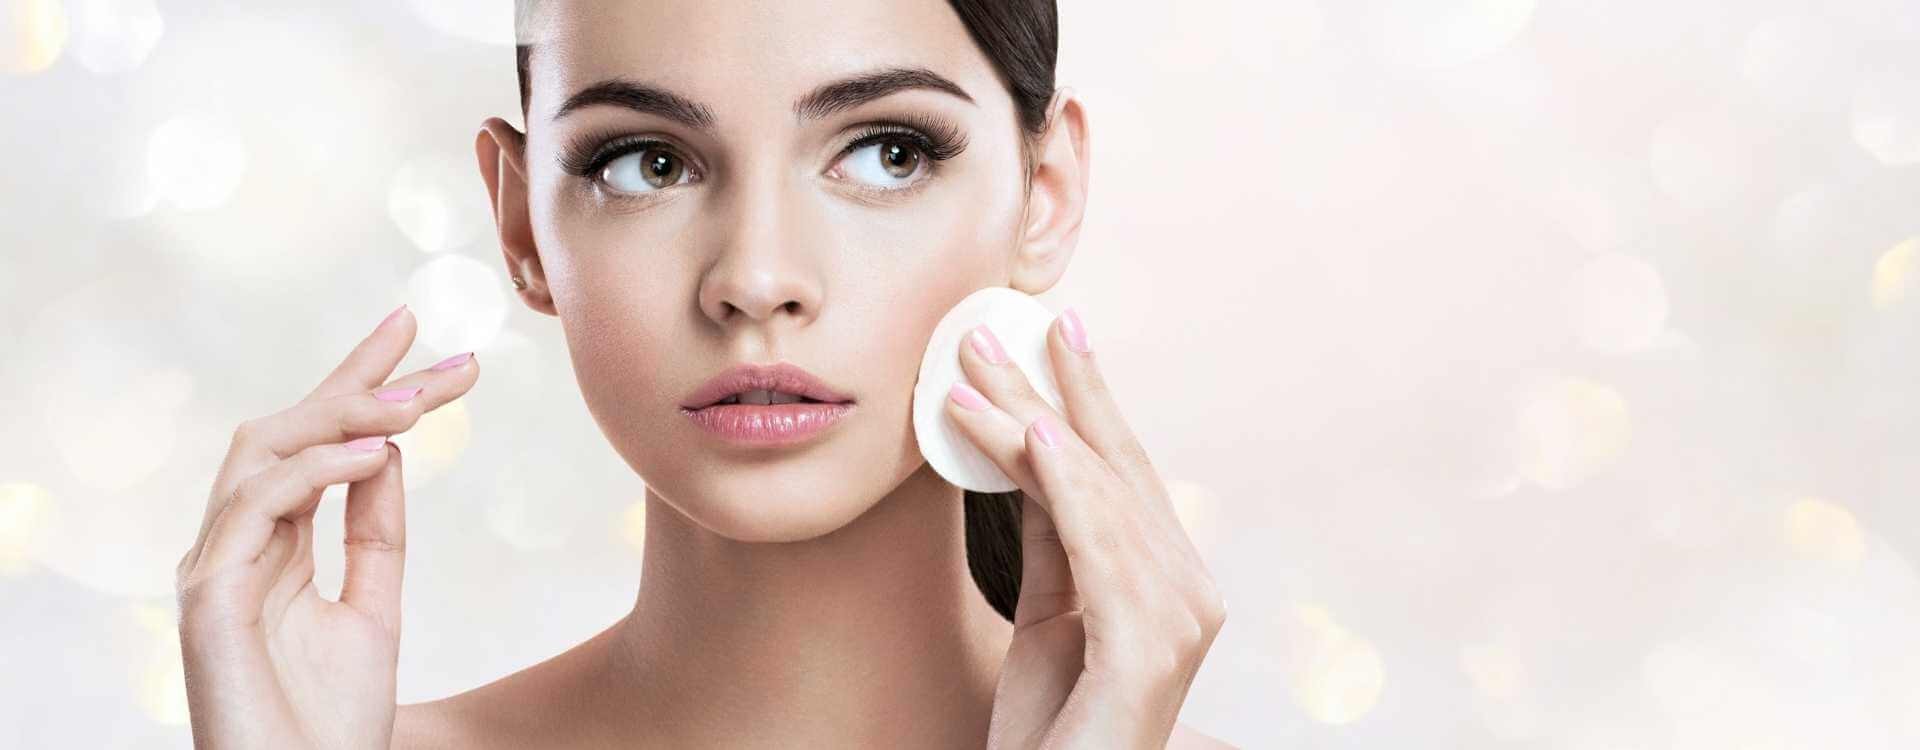 The Best Skin Care Products for Healthy Skin